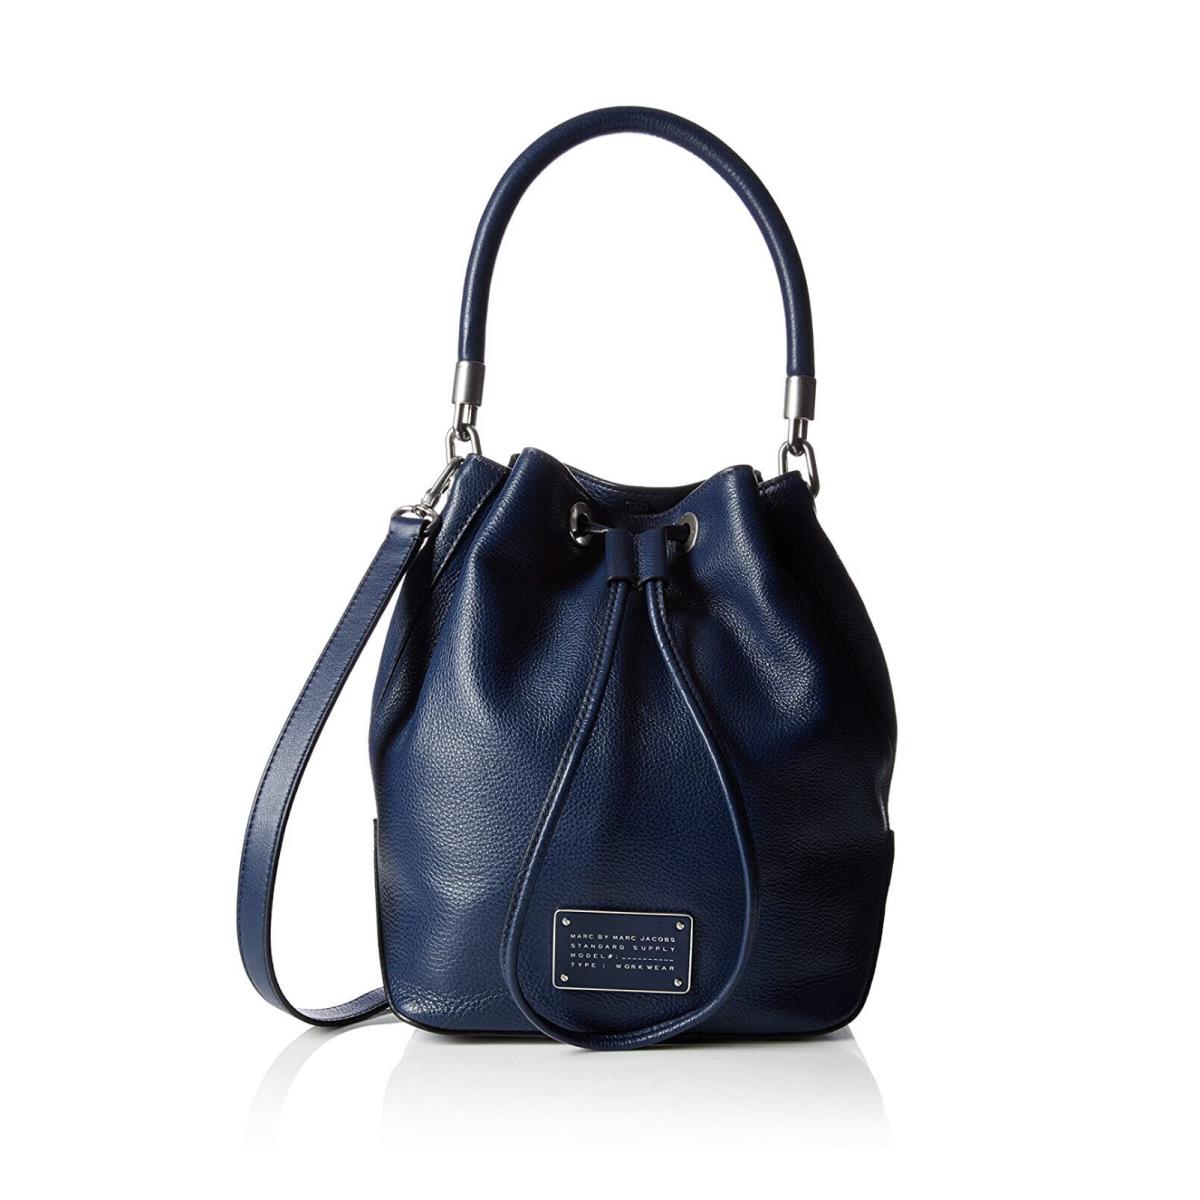 Marc by Marc Jacobs Too Hot to Handle Leather Bucket Bag Amalfi Coast Blue